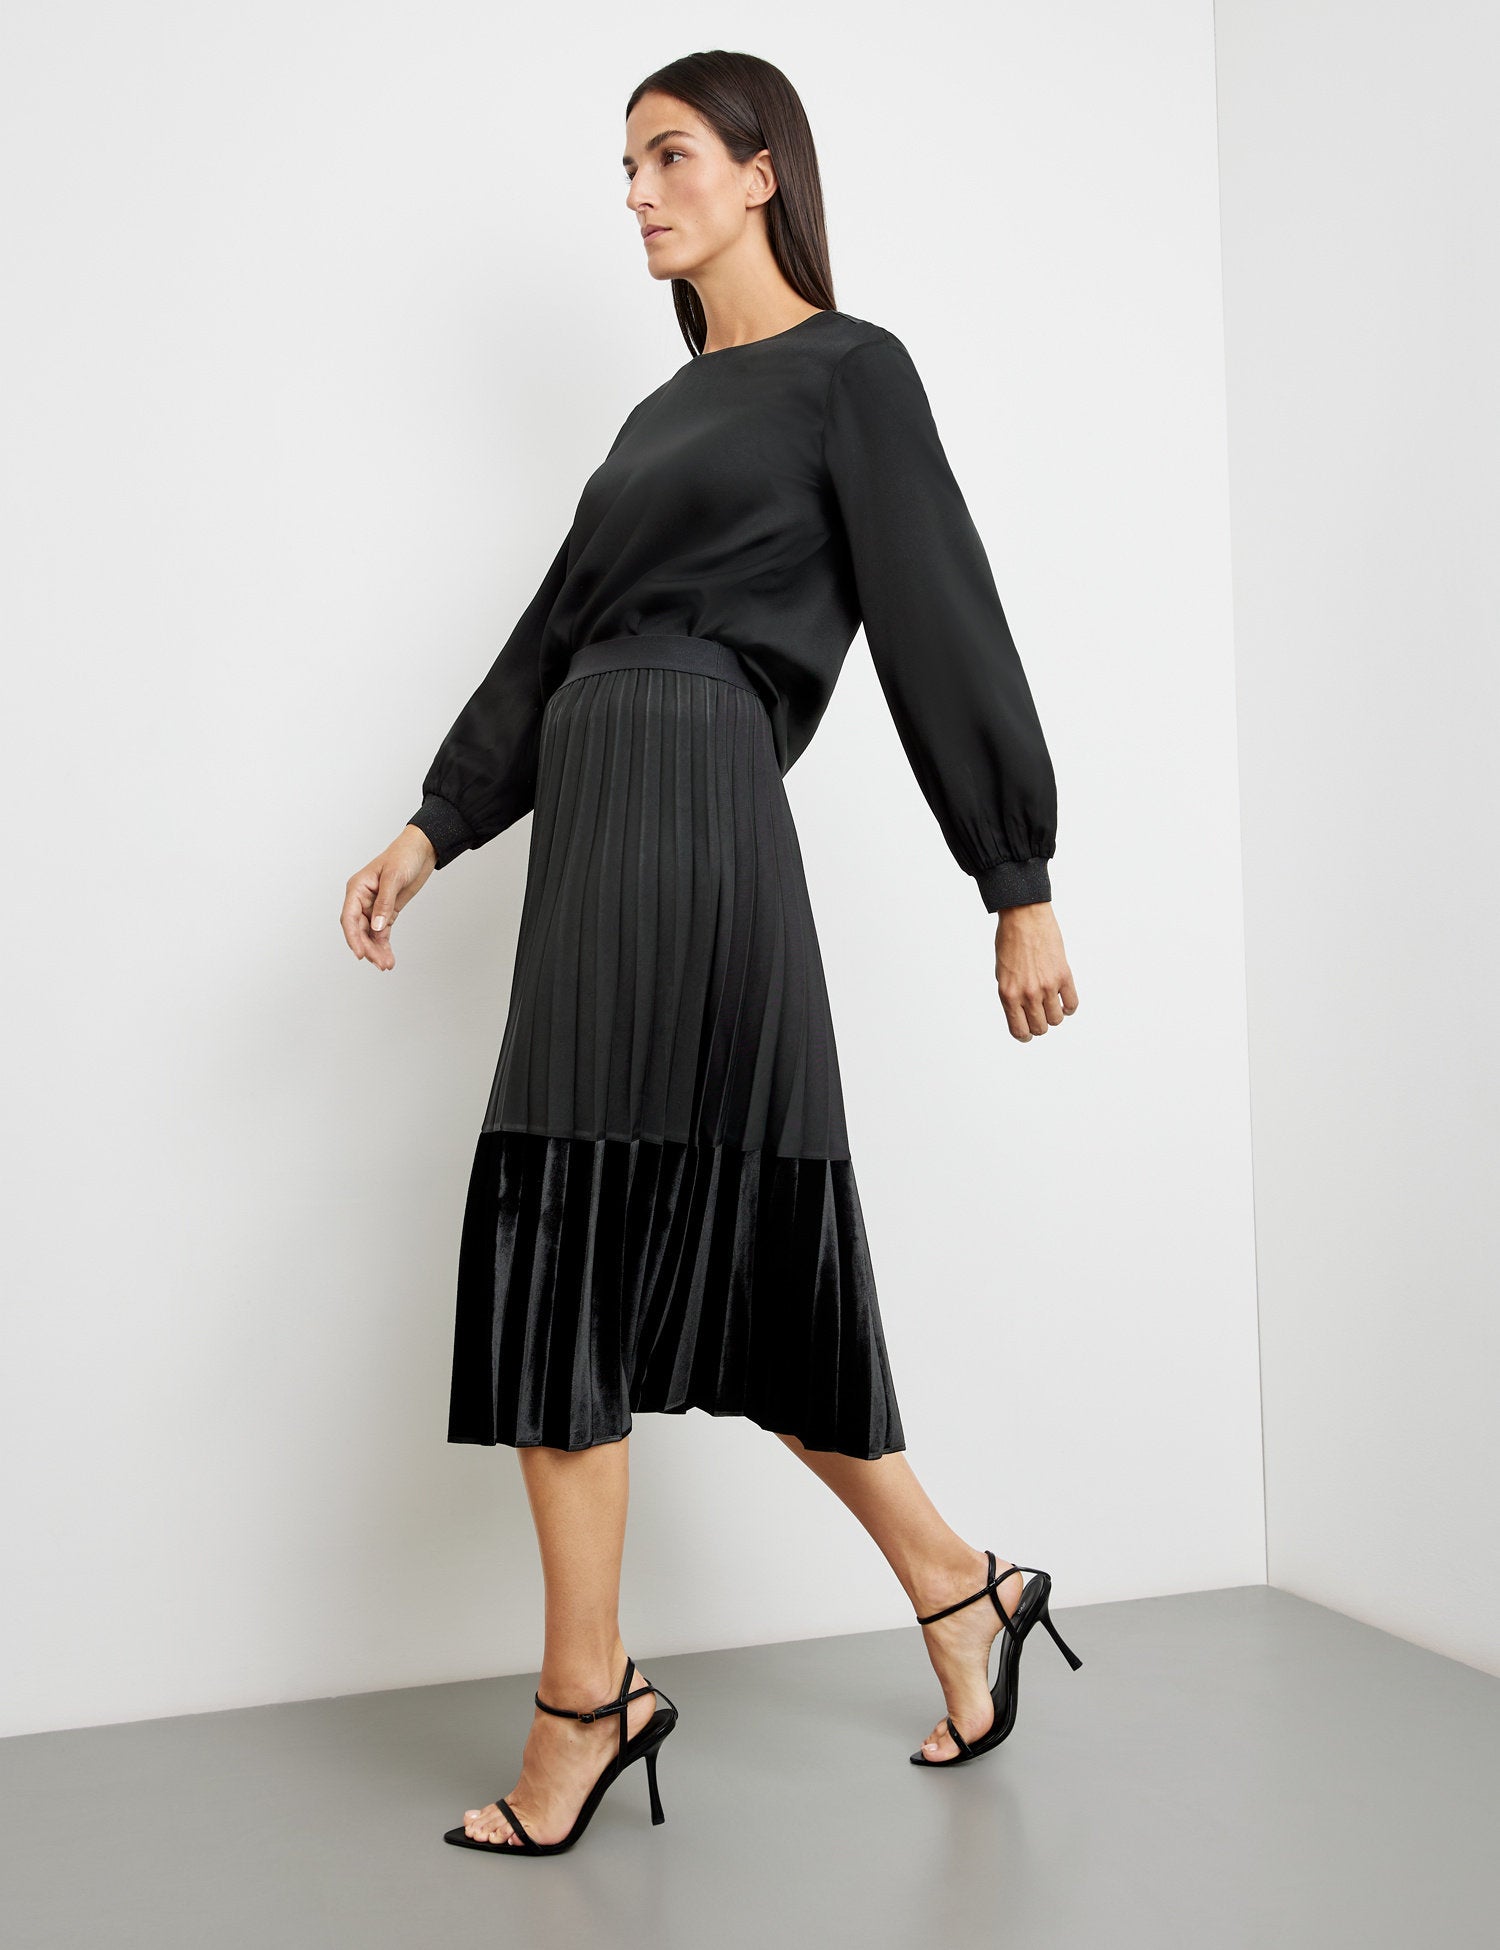 Flowing Pleated Skirt With A Set-In Velvet Section_210024-31523_11000_05